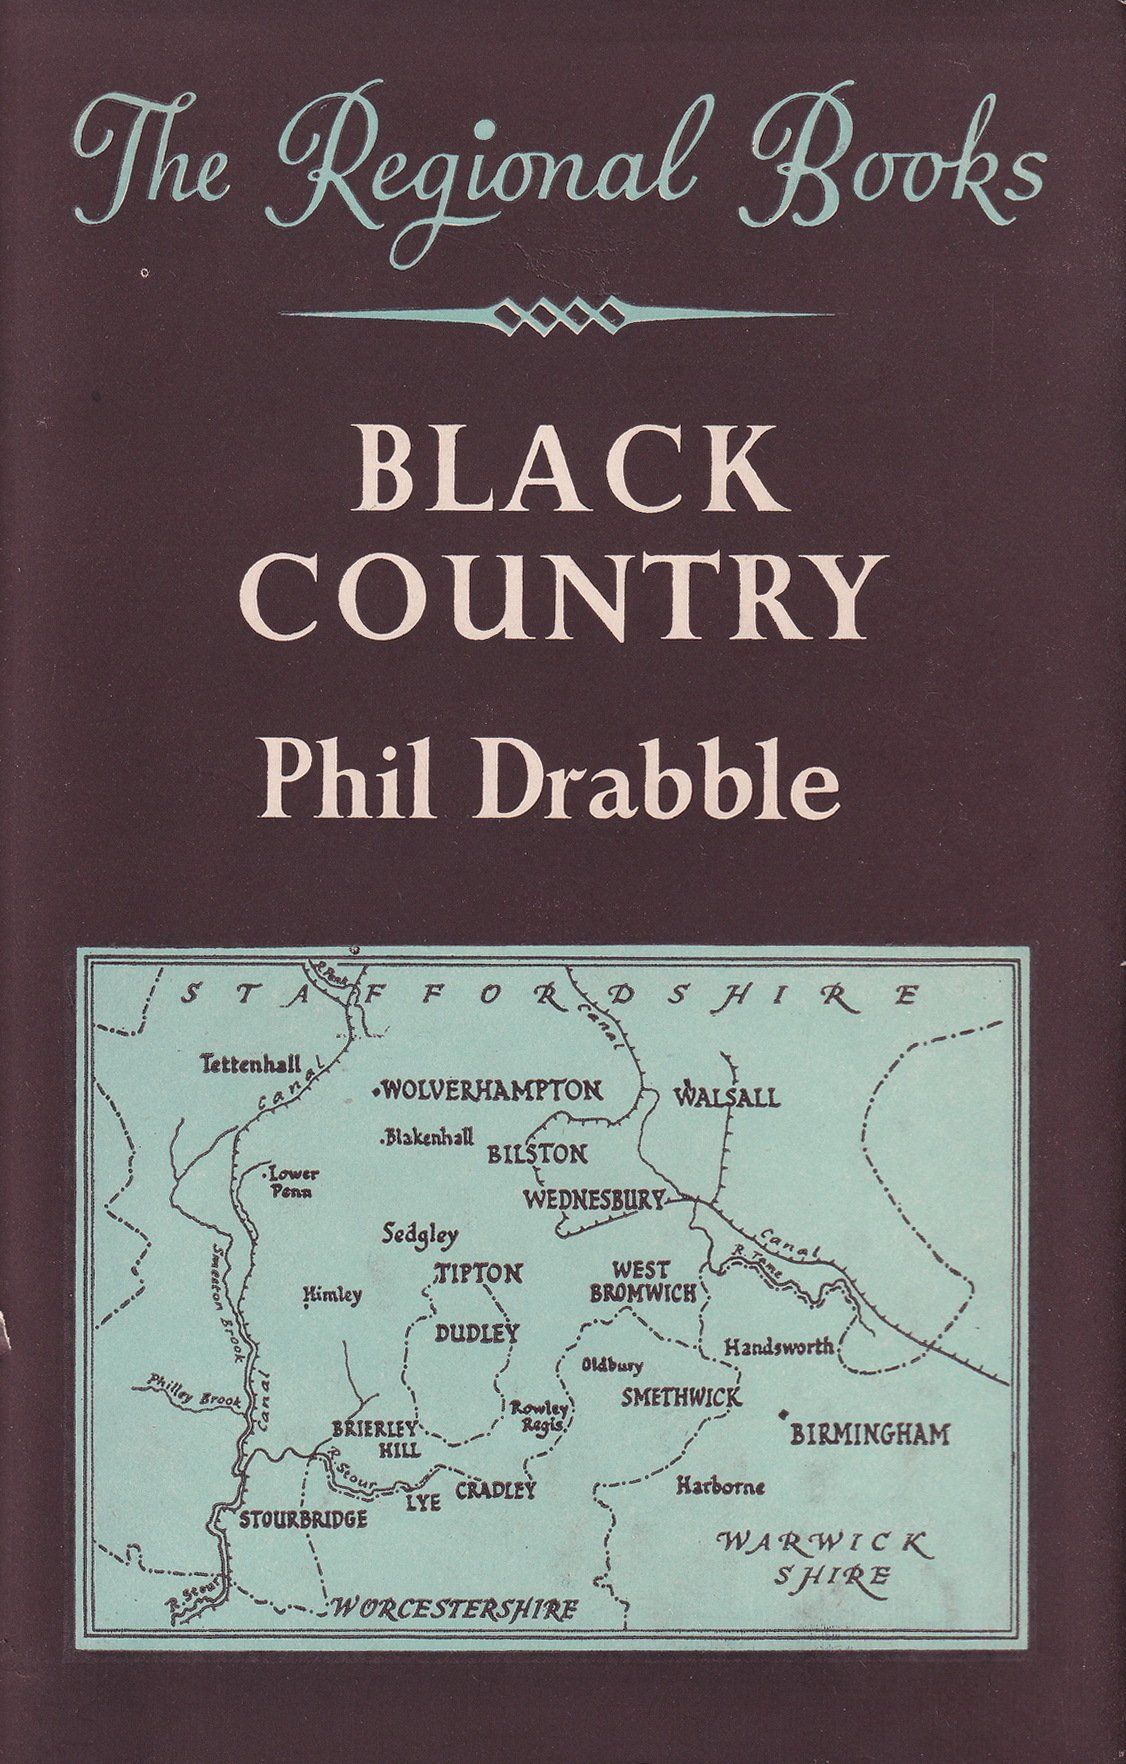 Black Country by Phil Drabble